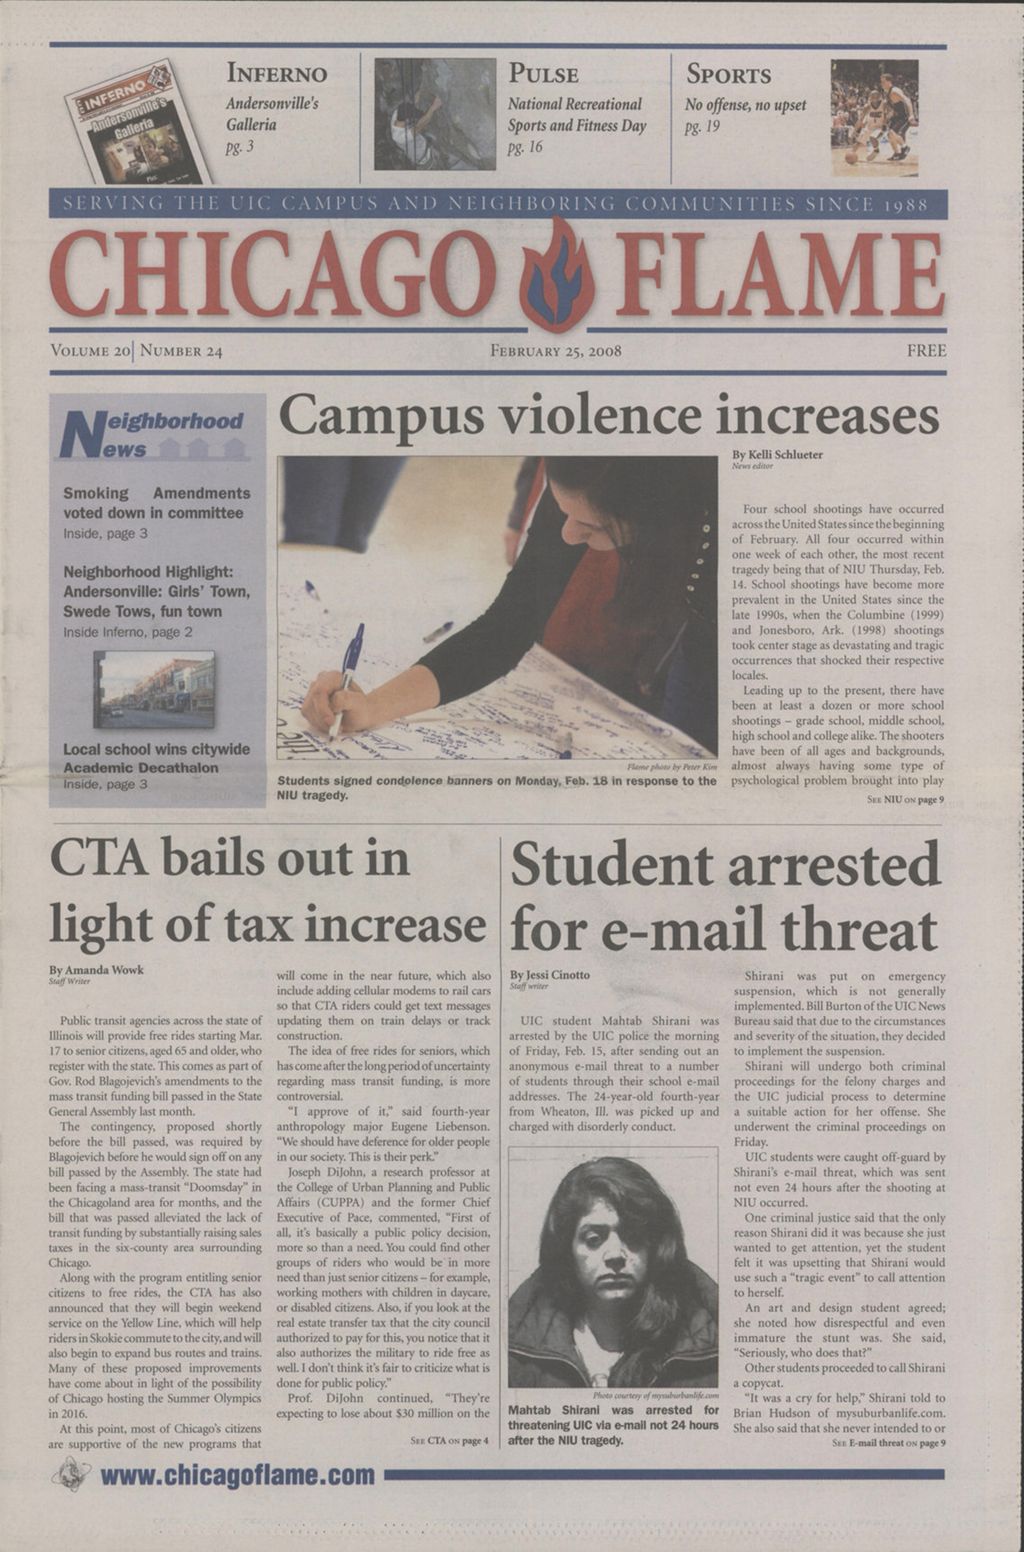 Chicago Flame (February 25, 2008)